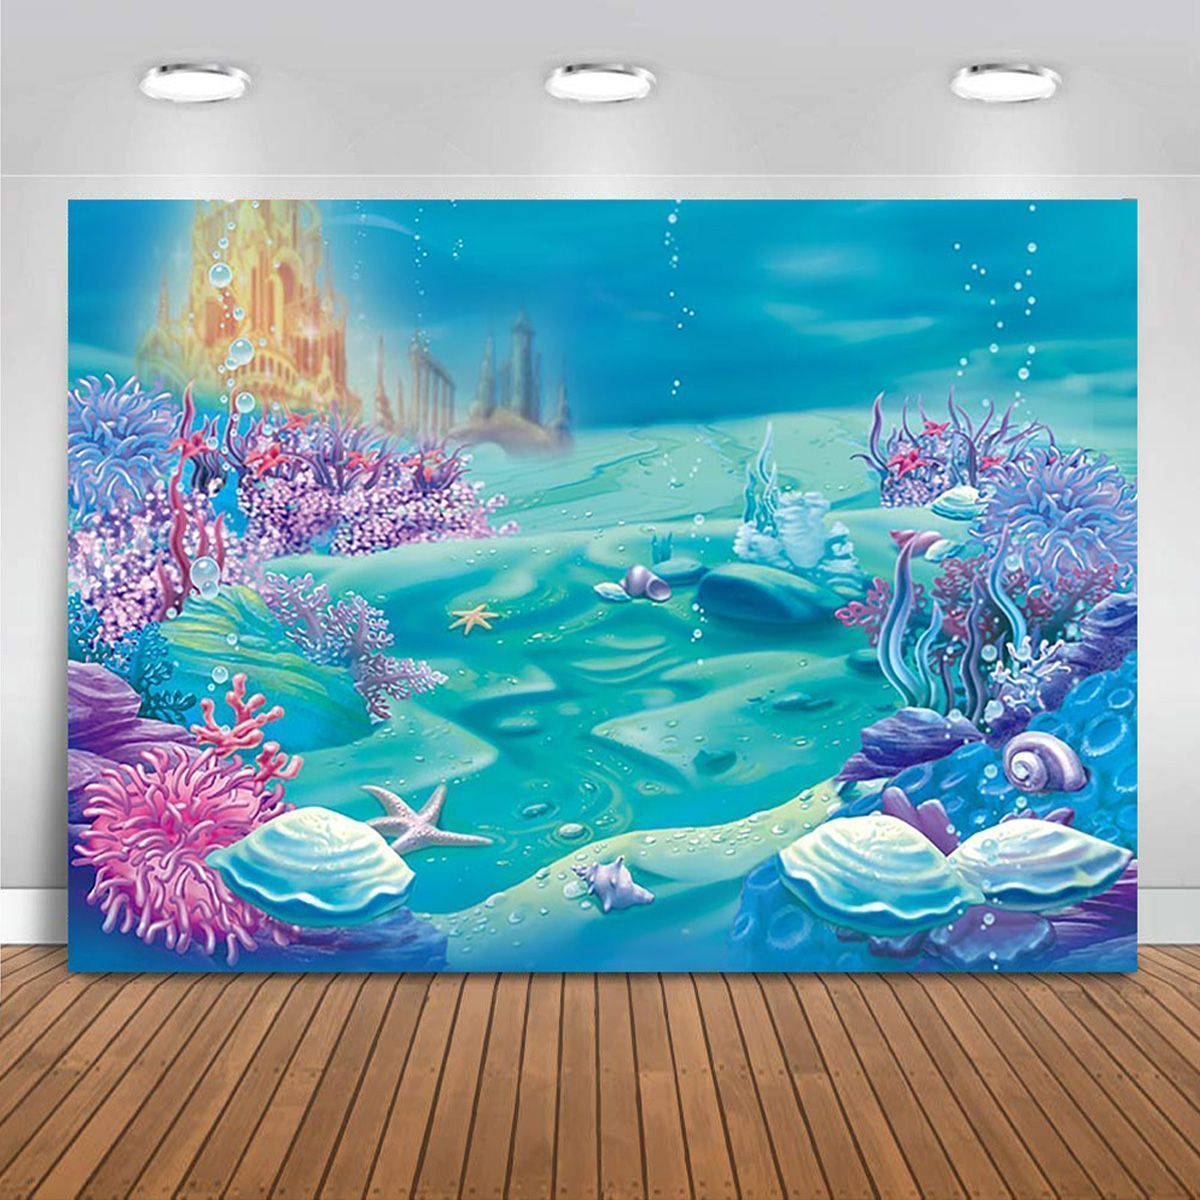 5x3FT-7x5FT-9x6FT--Sea-World-Underwater-Coral-Plant-Studio-Photography-Backdrops-Background-1680648